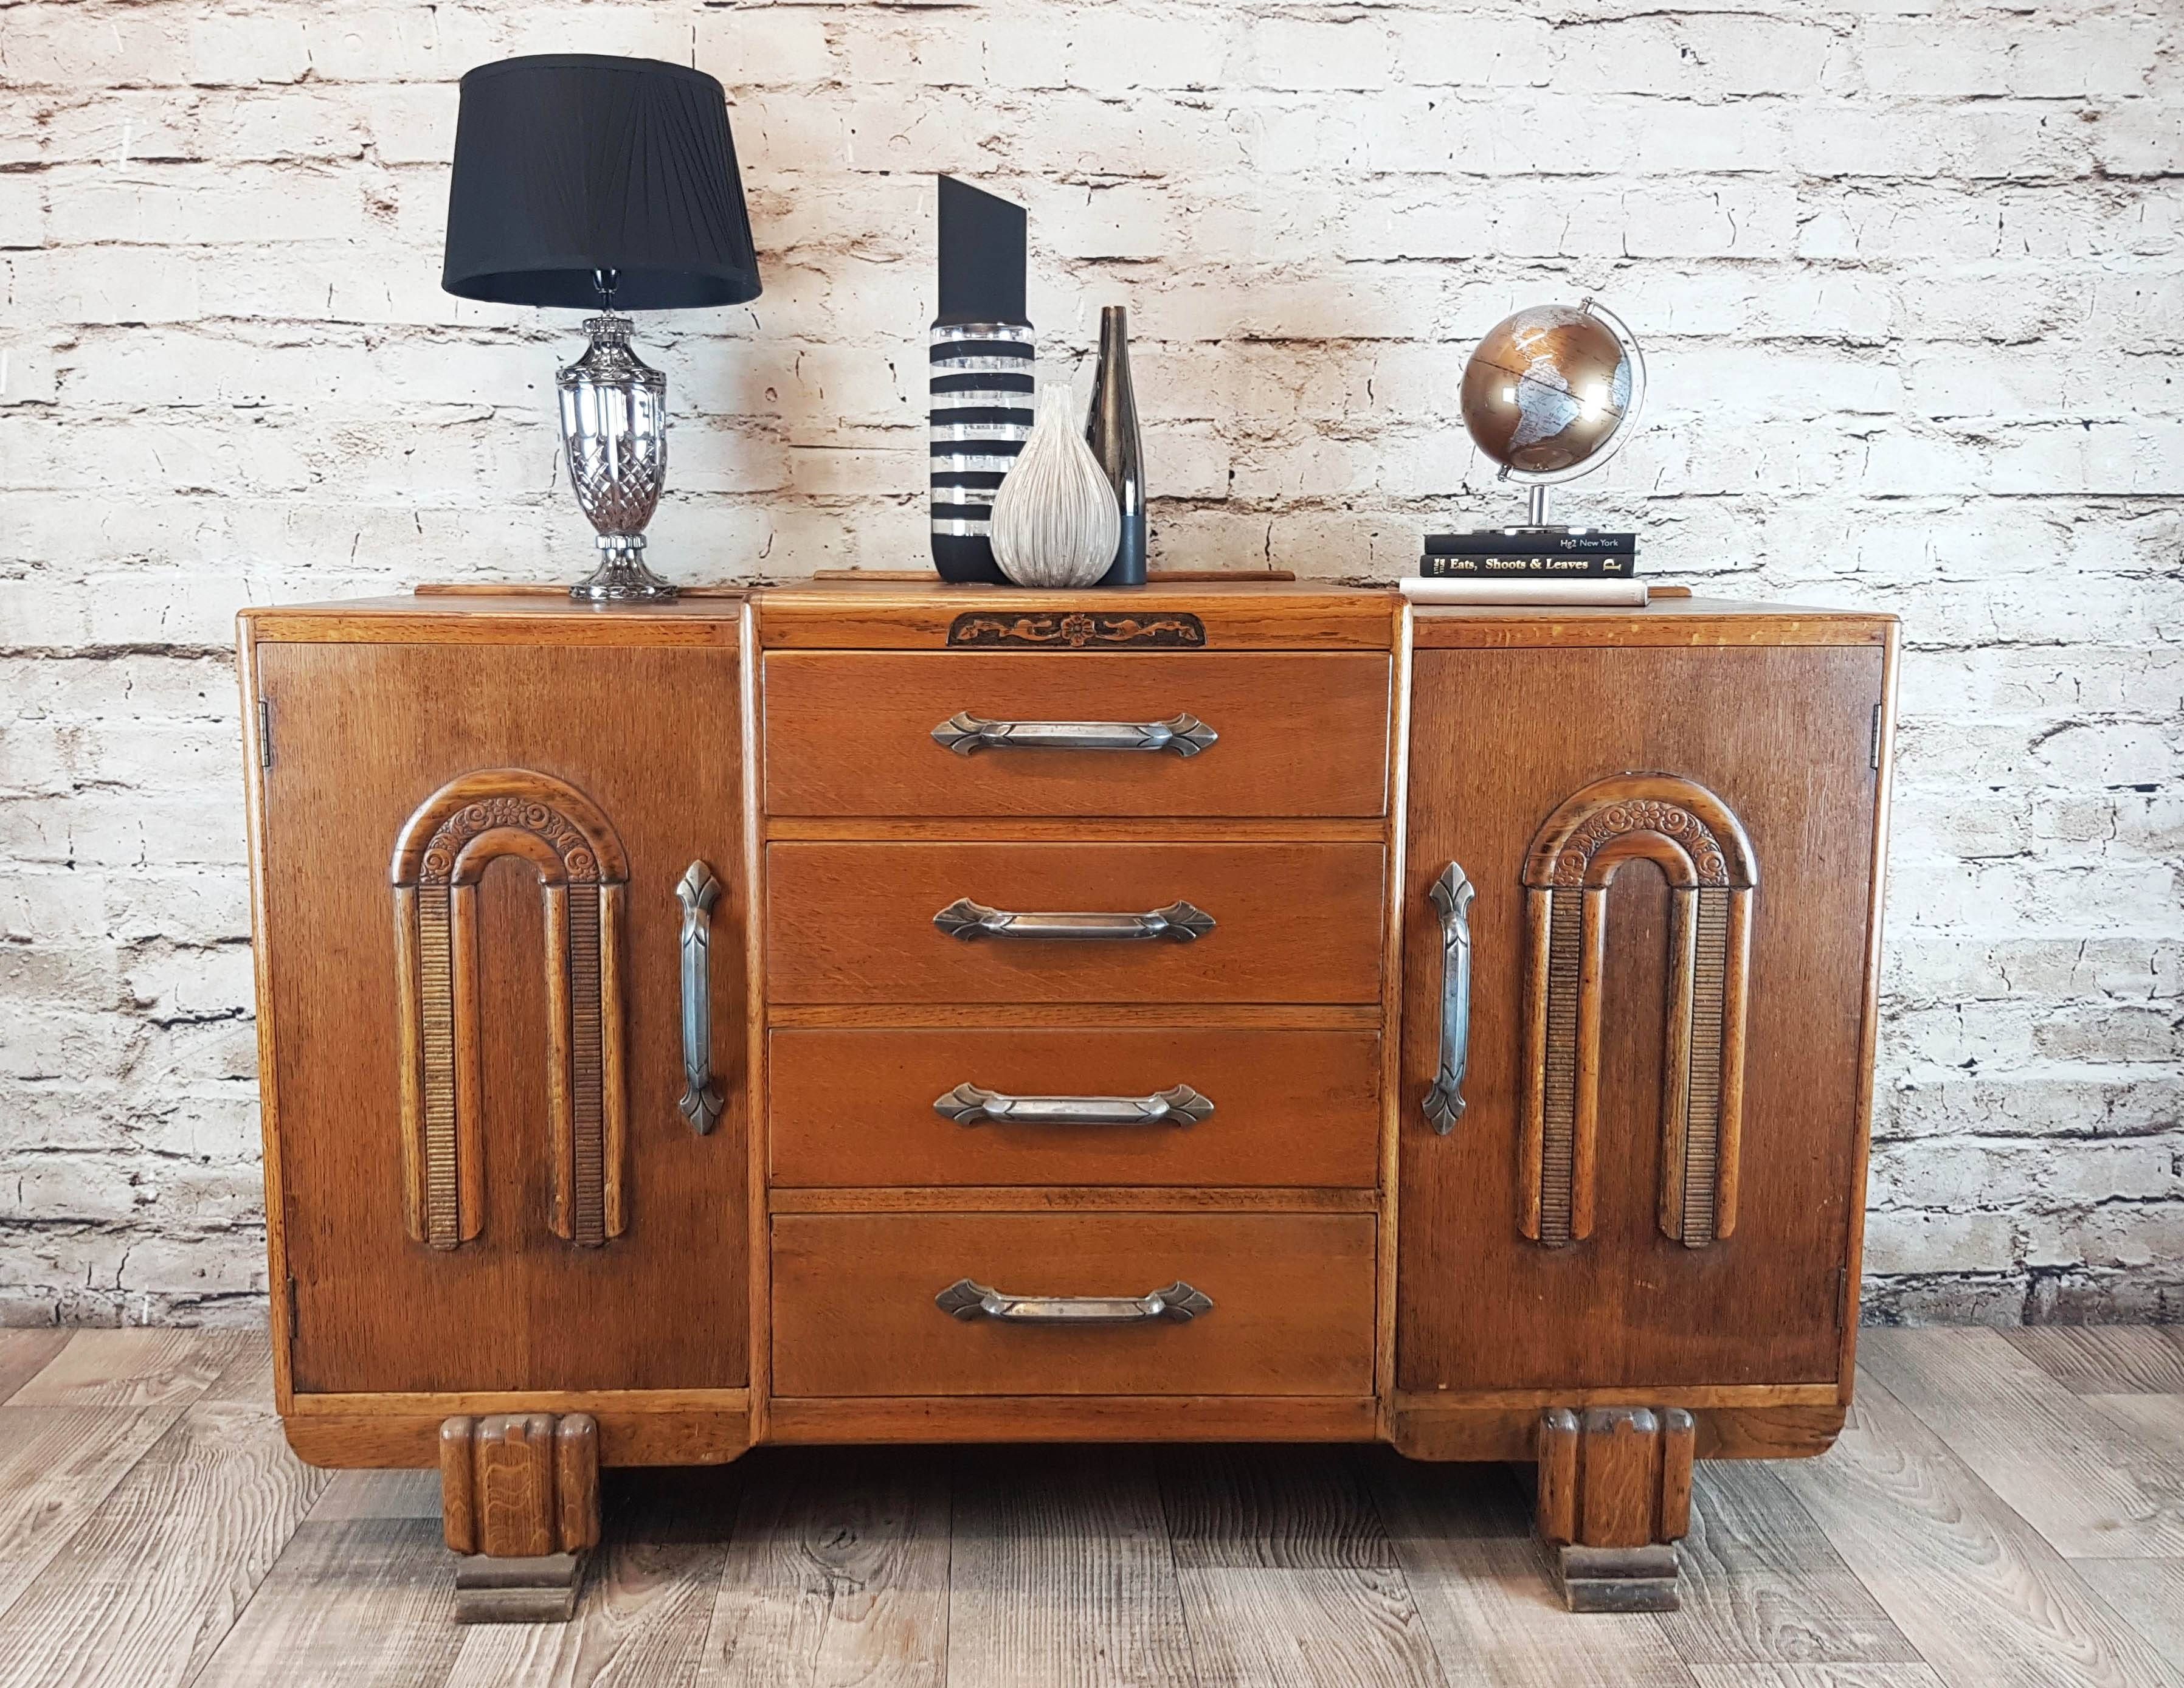 Antique Oak 1930s Art Deco Sideboard | Vinterior Throughout Most Current Art Deco Sideboards (View 10 of 15)